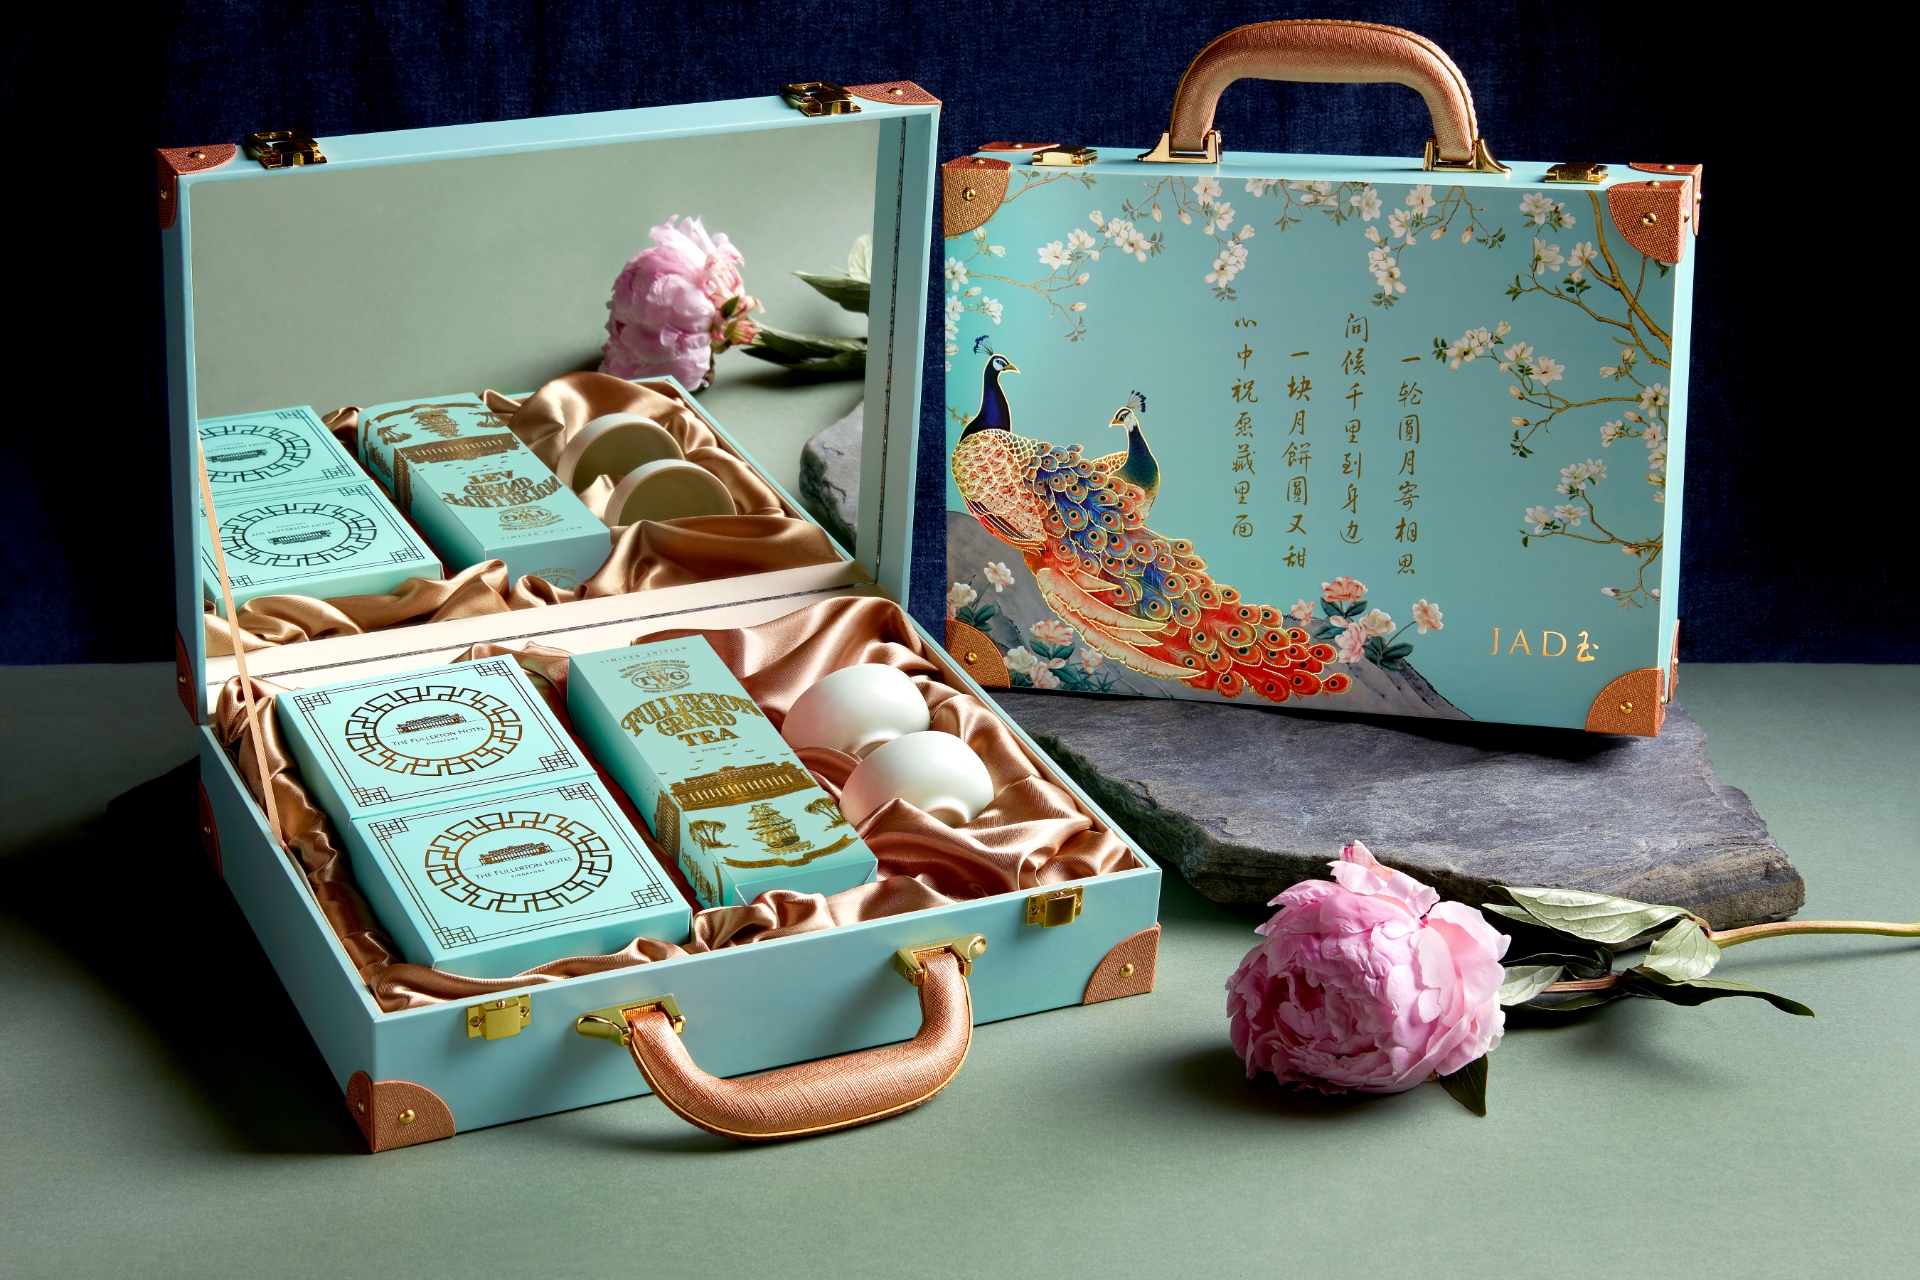 How did elaborate mooncake packaging become a problem in China